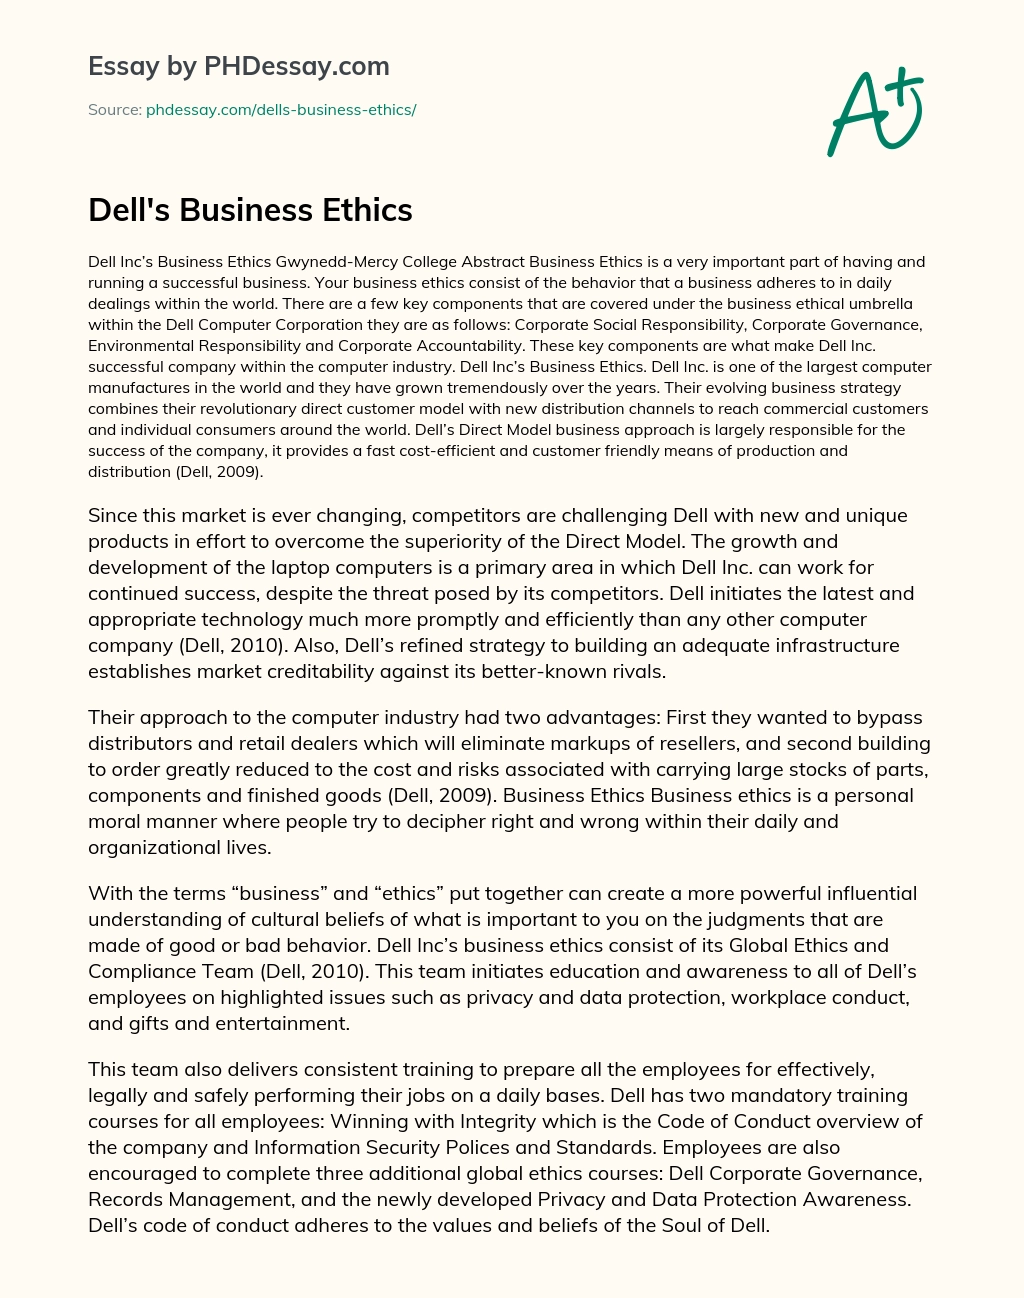 Dell’s Business Ethics essay